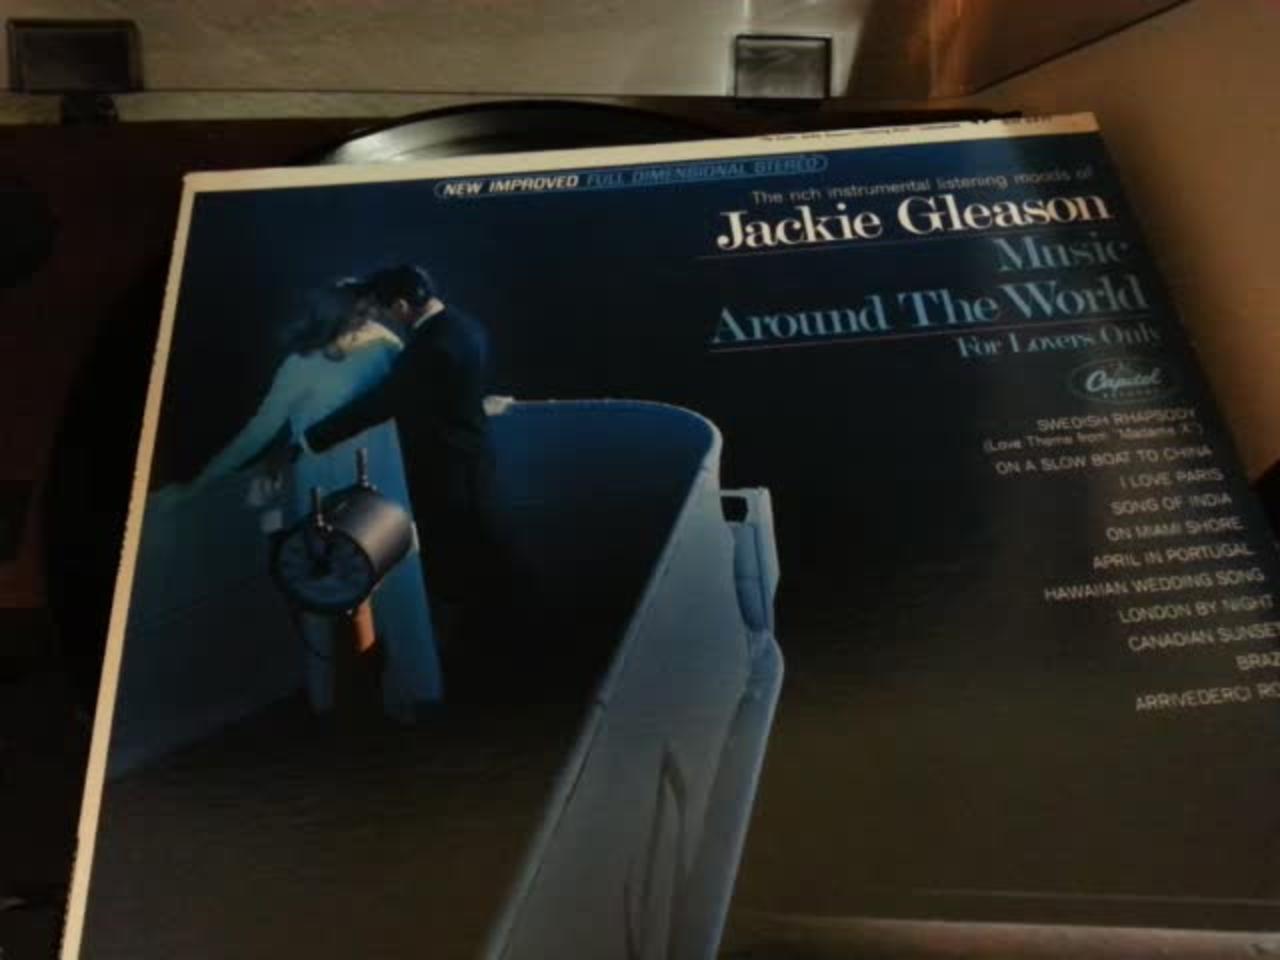 Jackie Gleason Music Around The World For Lovers Only Capitol Records 1966 LP For Sale